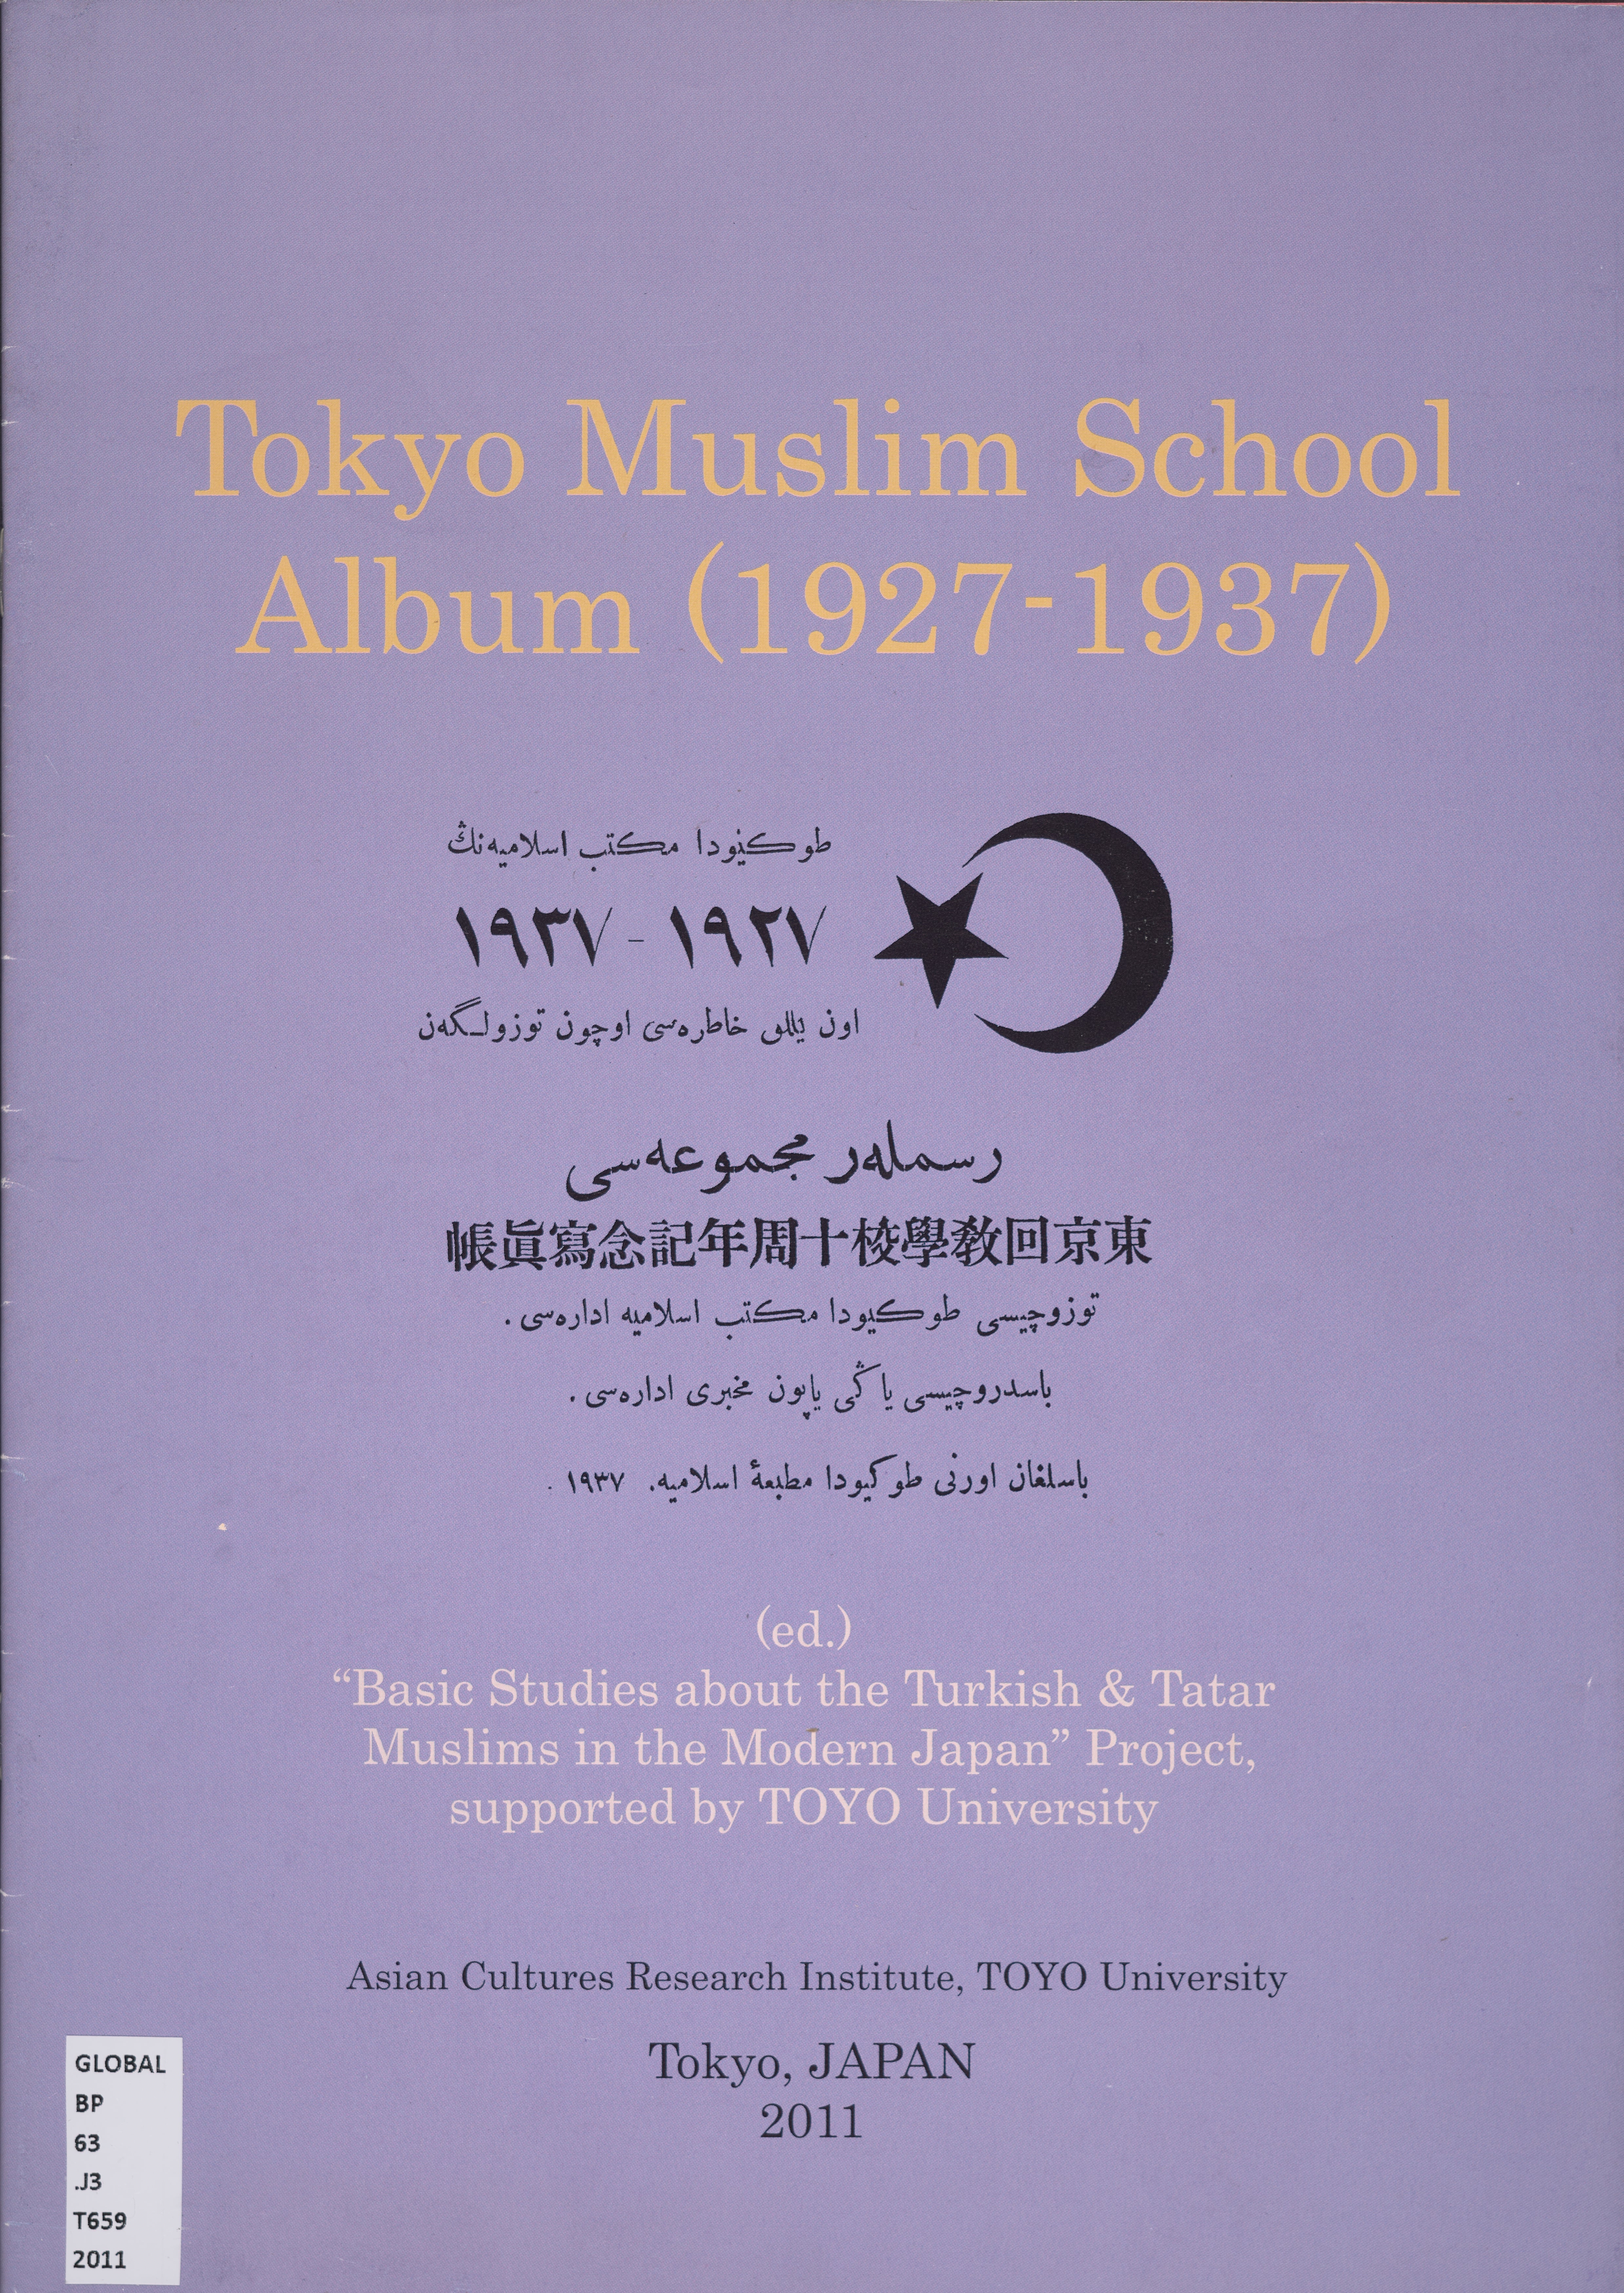 Cover of the Tokyo Muslim School Album (1927-1937) with texts in English and Arabic, published by the Asian Cultures Research Institute, TOYO University. The cover features a title in large, bold English letters at the top, Arabic text and dates written in both Arabic numerals and script, and a crescent moon and star symbol. At the bottom, there’s a note indicating that this work is part of “Basic Studies about the Turkish & Tatar Muslims in Modern Japan” Project supported by TOYO University.